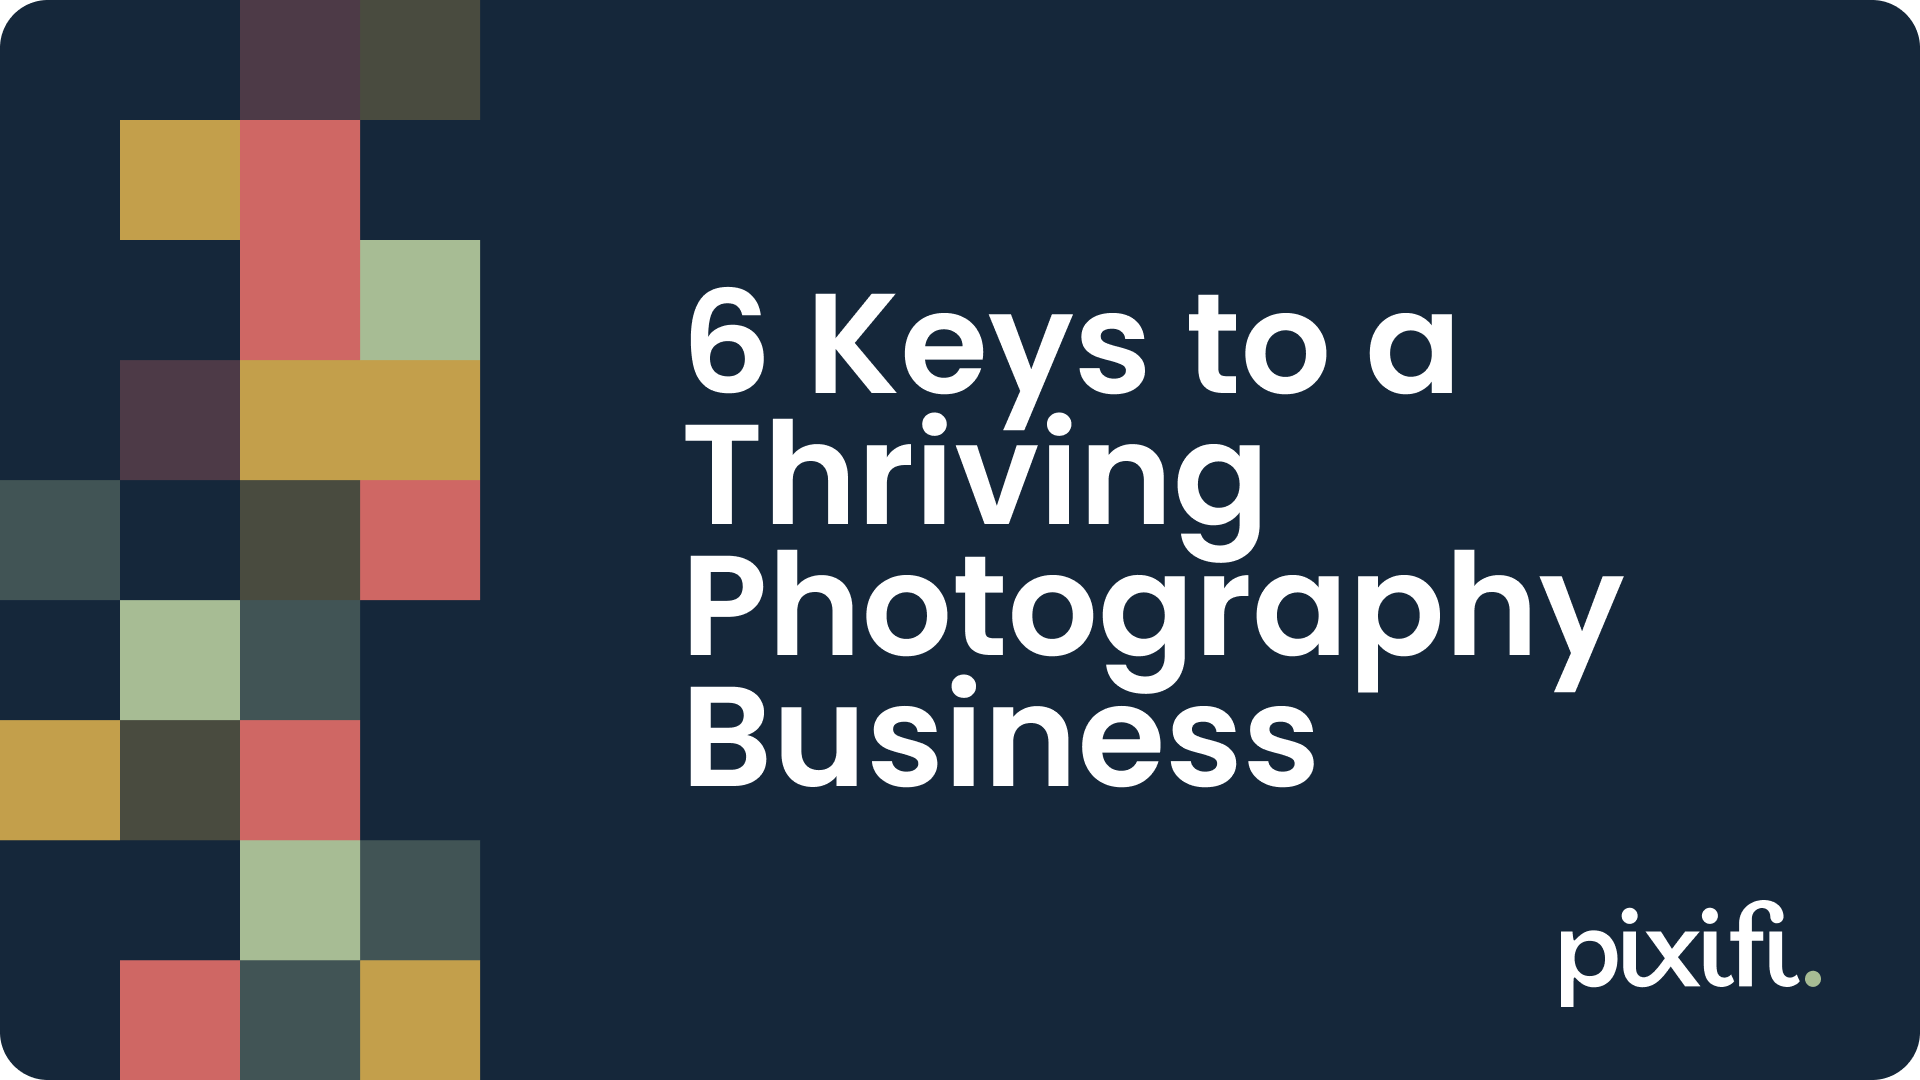 6 Keys to a Thriving Photography Business